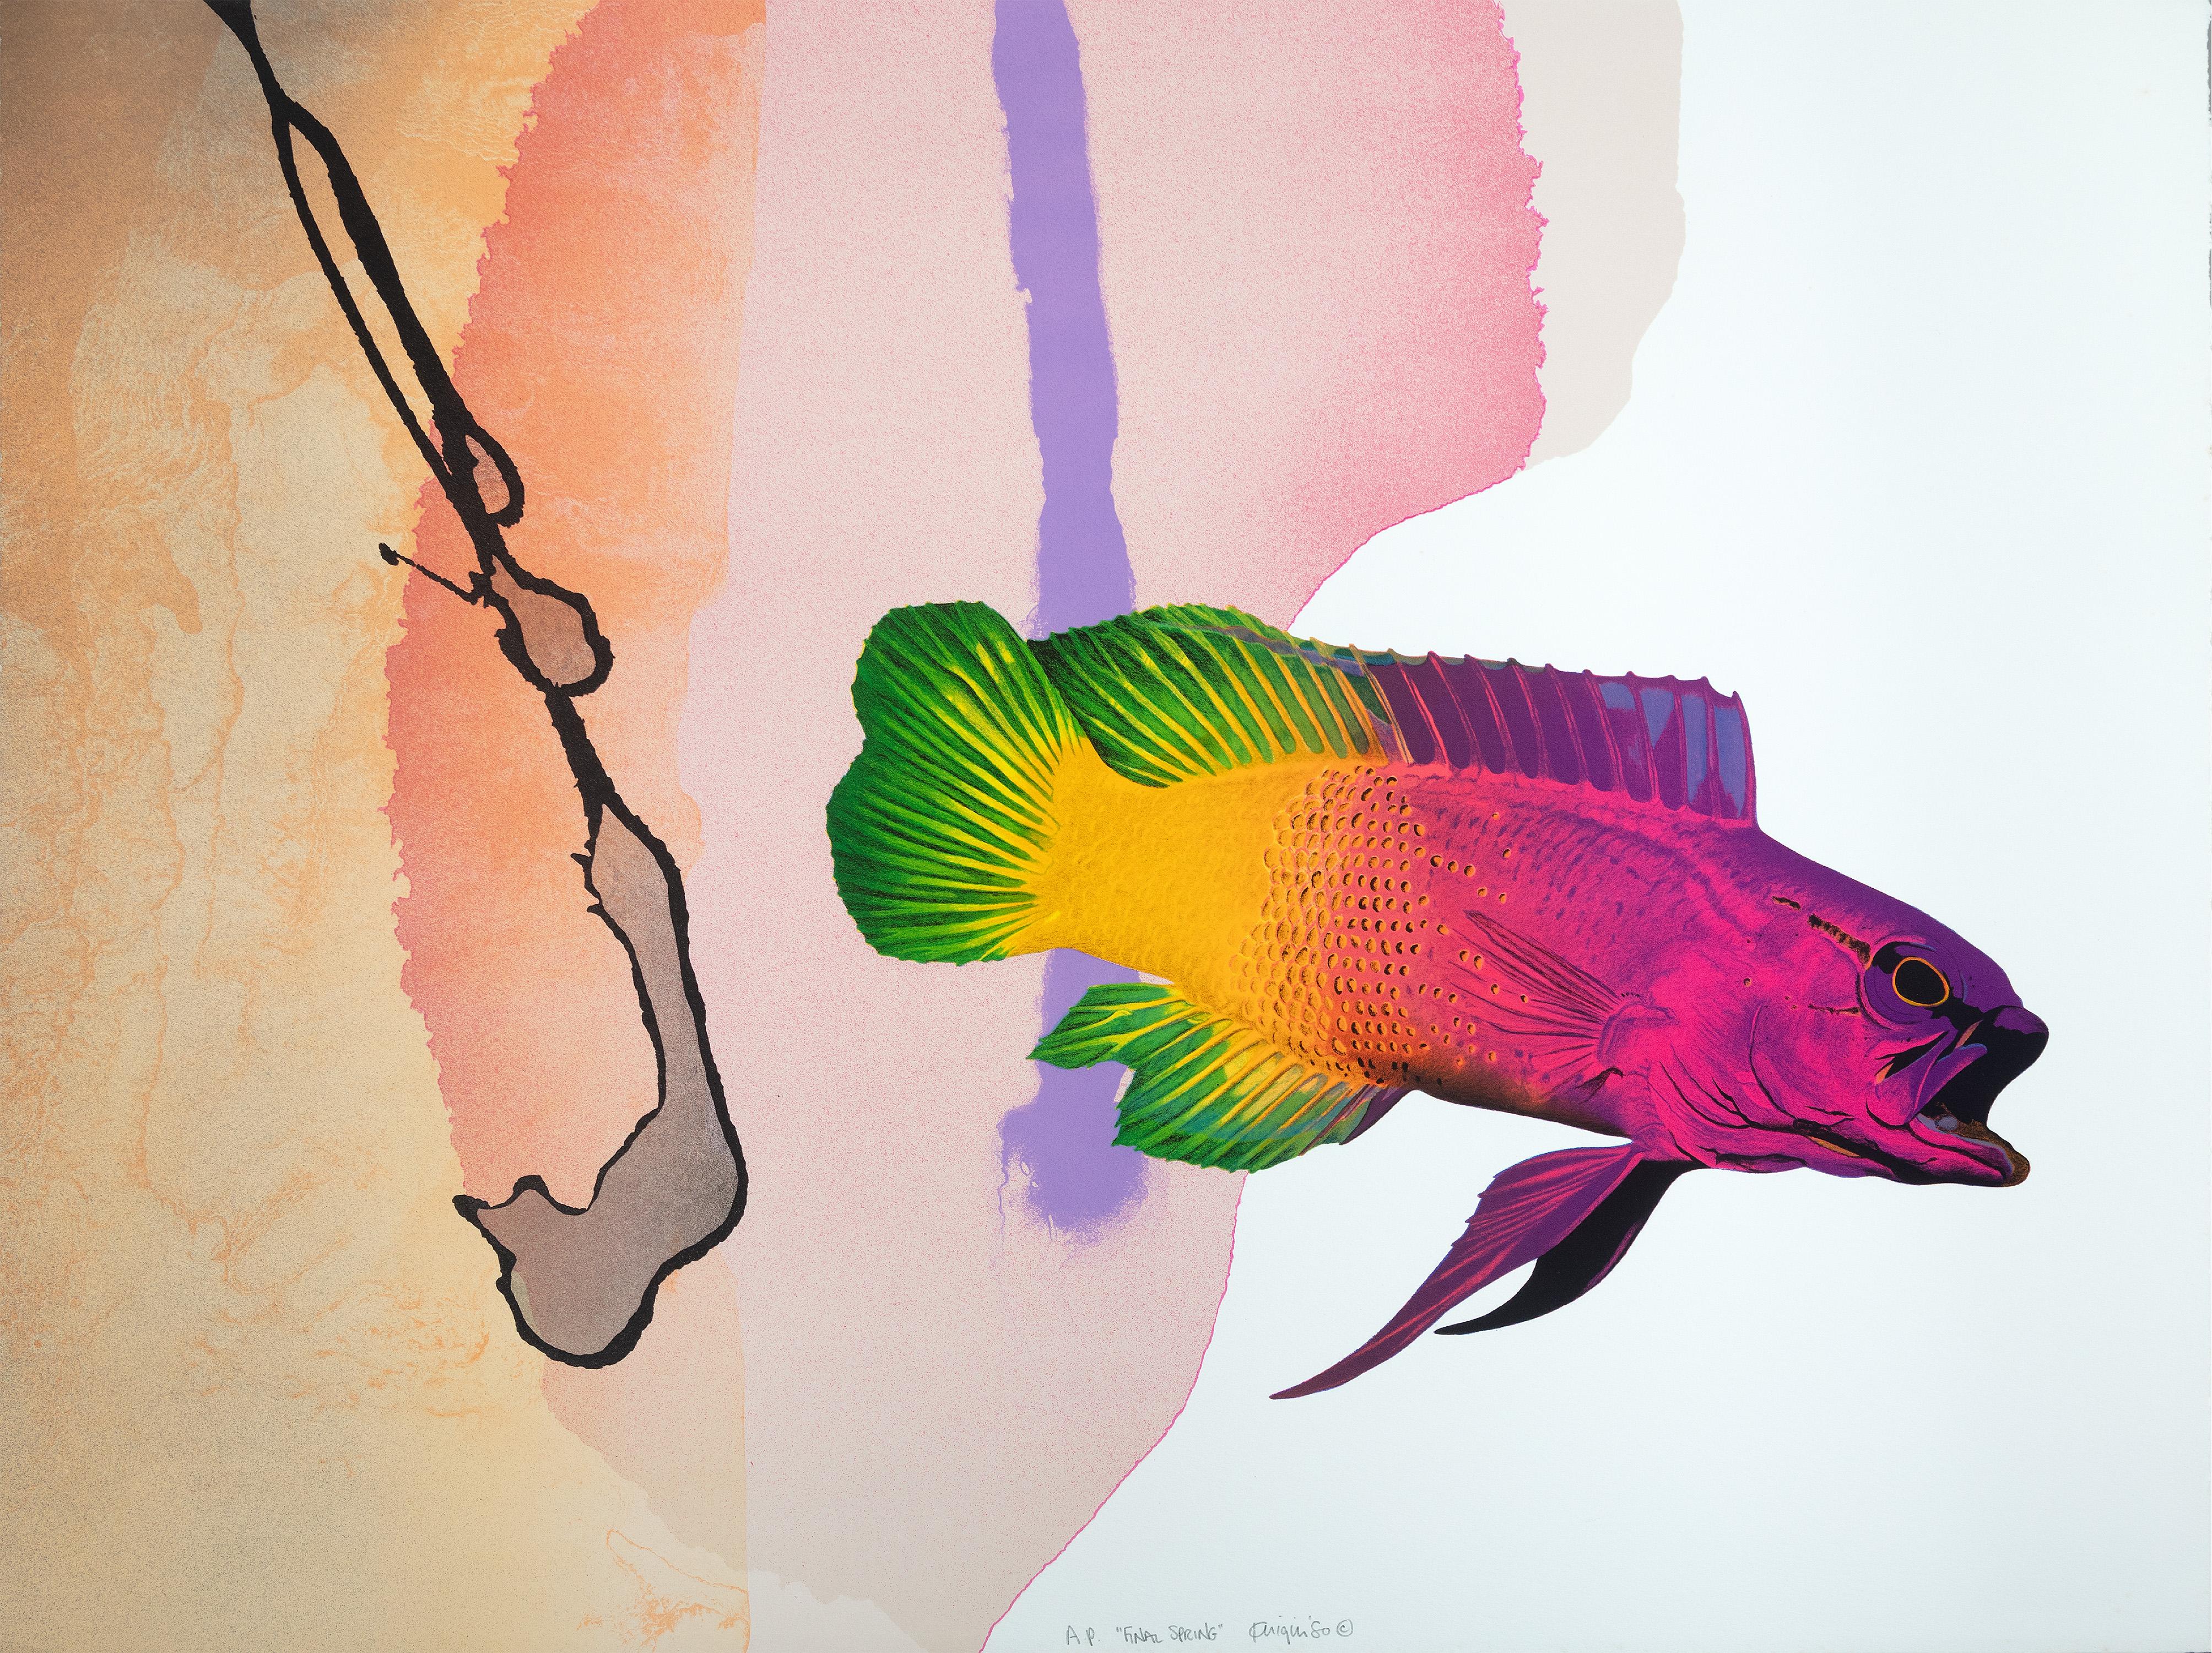 "Final Spring" is an original color lithograph by Michael Knigin. The artist signed and titled in the lower center of image. This piece is an artist's proof and features a brightly colored beta fish in front of a vibrant abstract background.